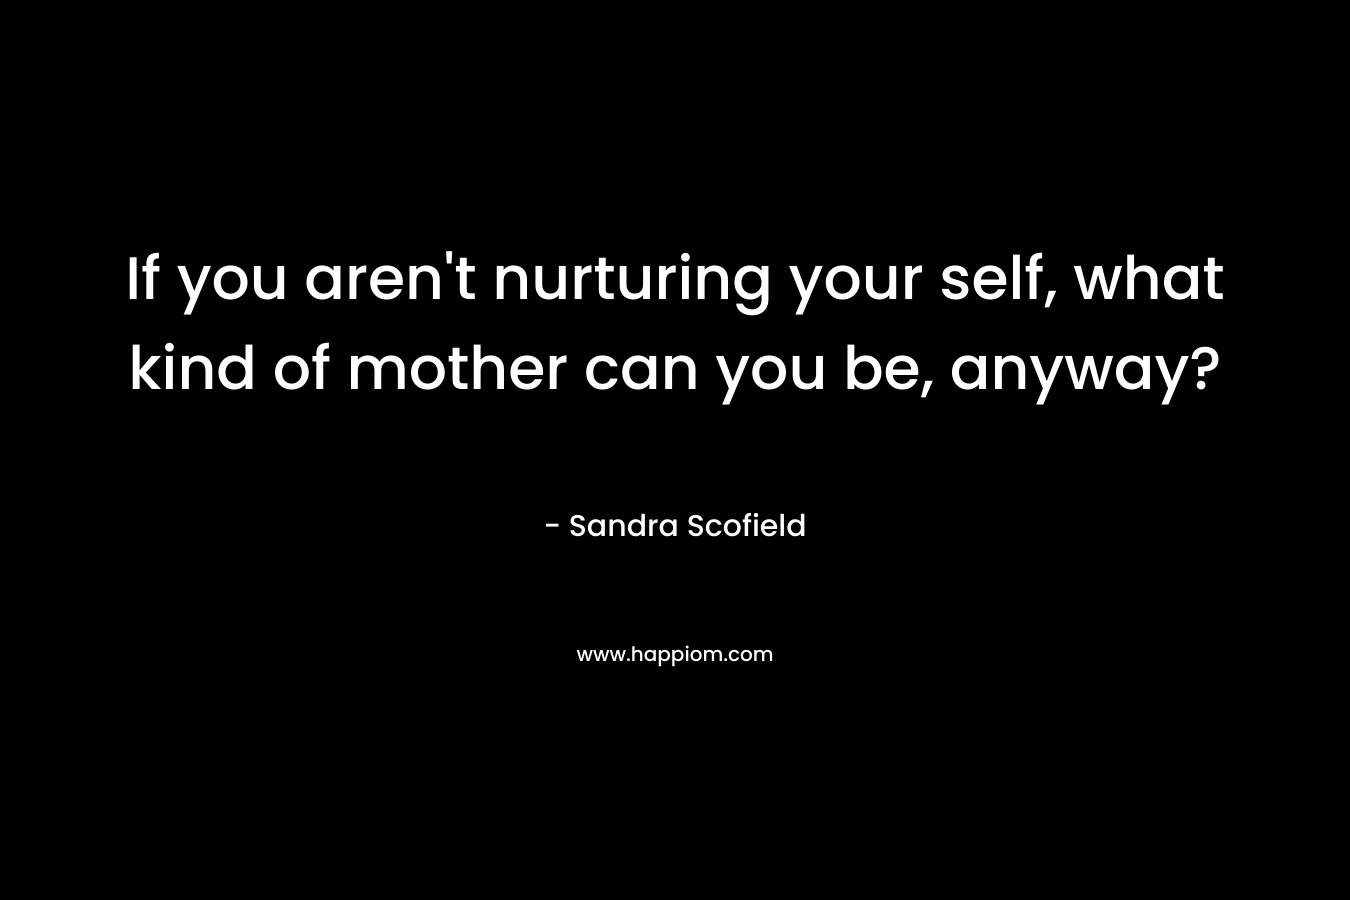 If you aren’t nurturing your self, what kind of mother can you be, anyway? – Sandra Scofield